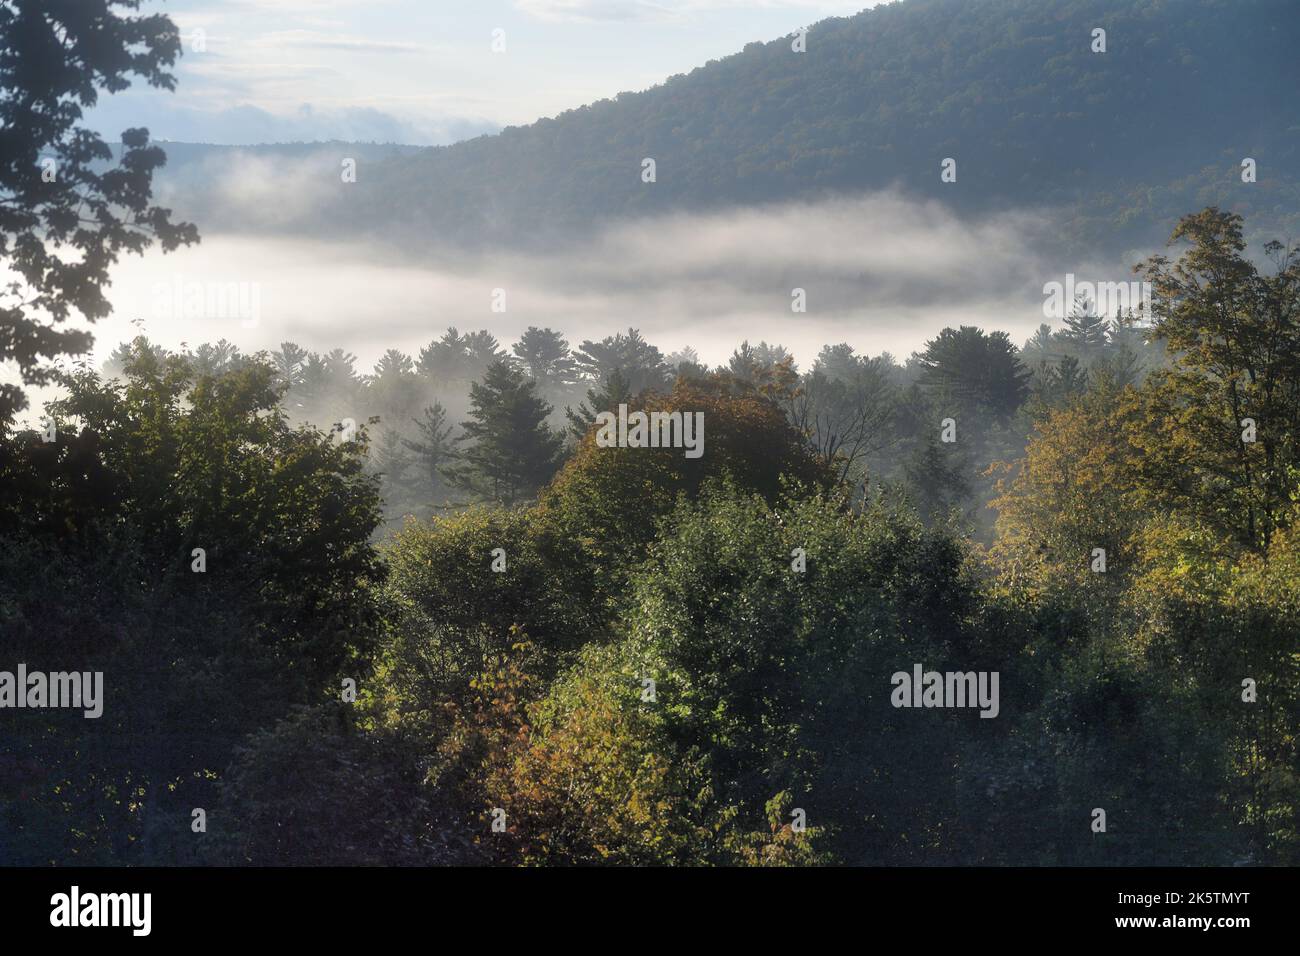 Chester, Vermont, USA. Fog and mist cling to the mountain valleys in the Green Mountains of Vermont in early morning. Stock Photo